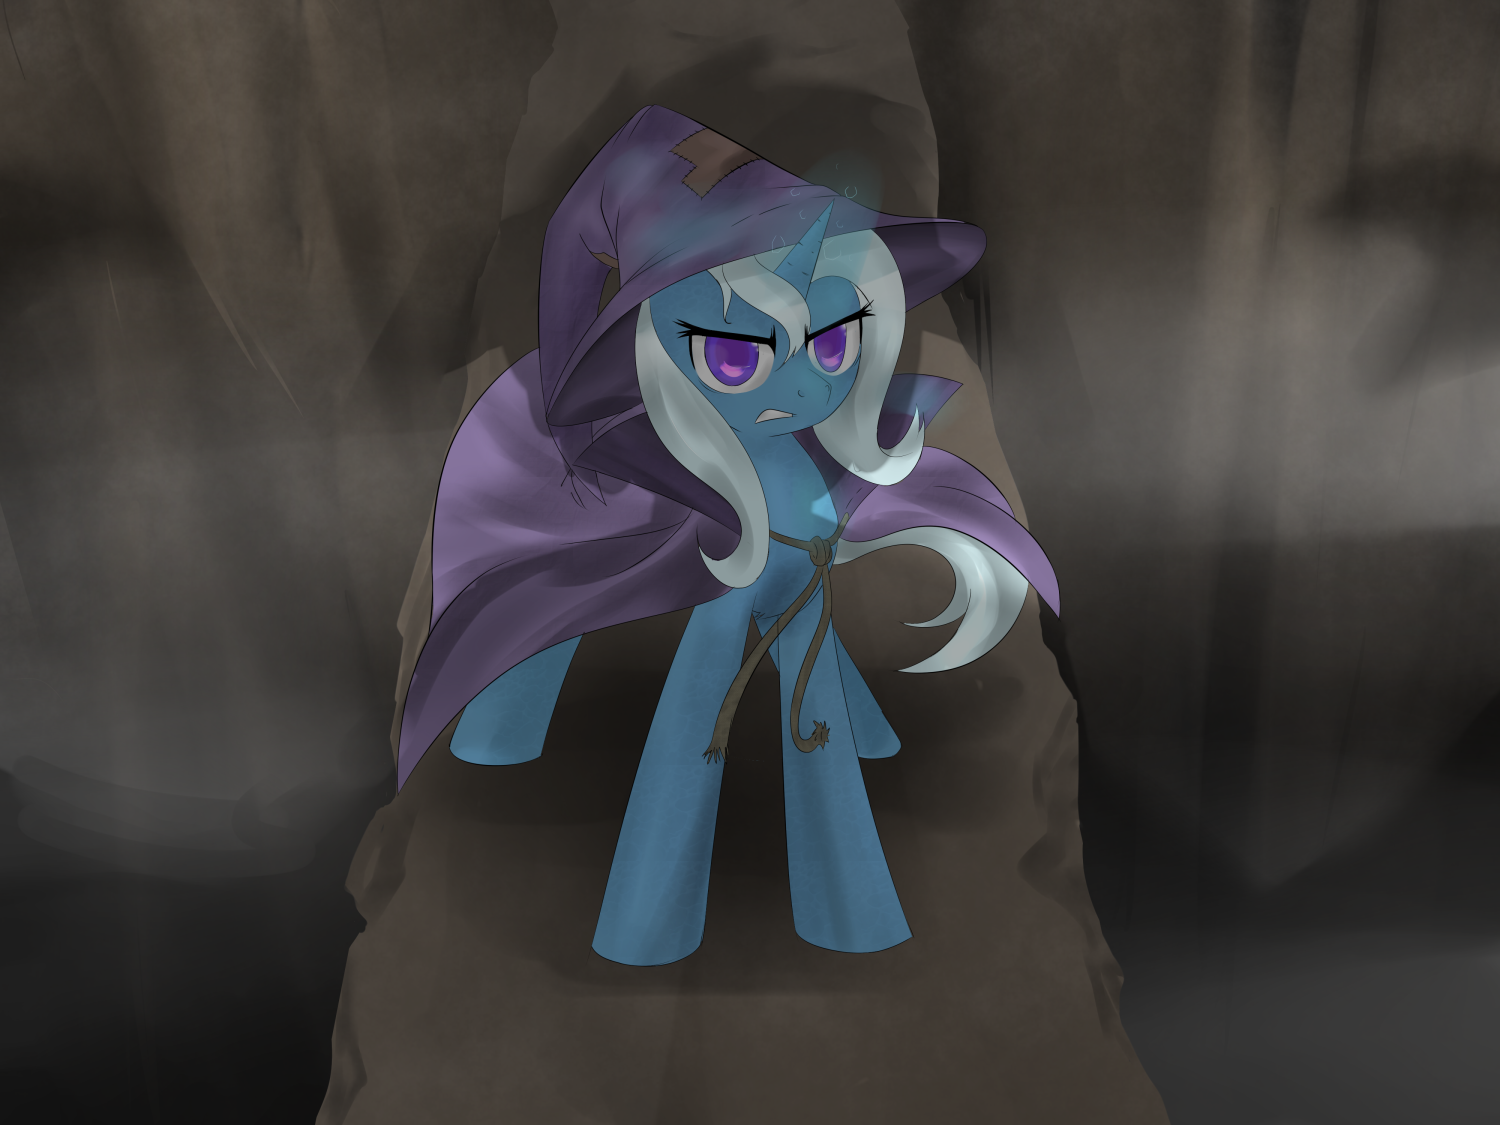 Funny pictures, videos and other media thread! - Page 12 163030+-+artist+prozenconns+Lord_of_the_Rings+parody+The_Great_And_Powerful_Trixie+Trixie